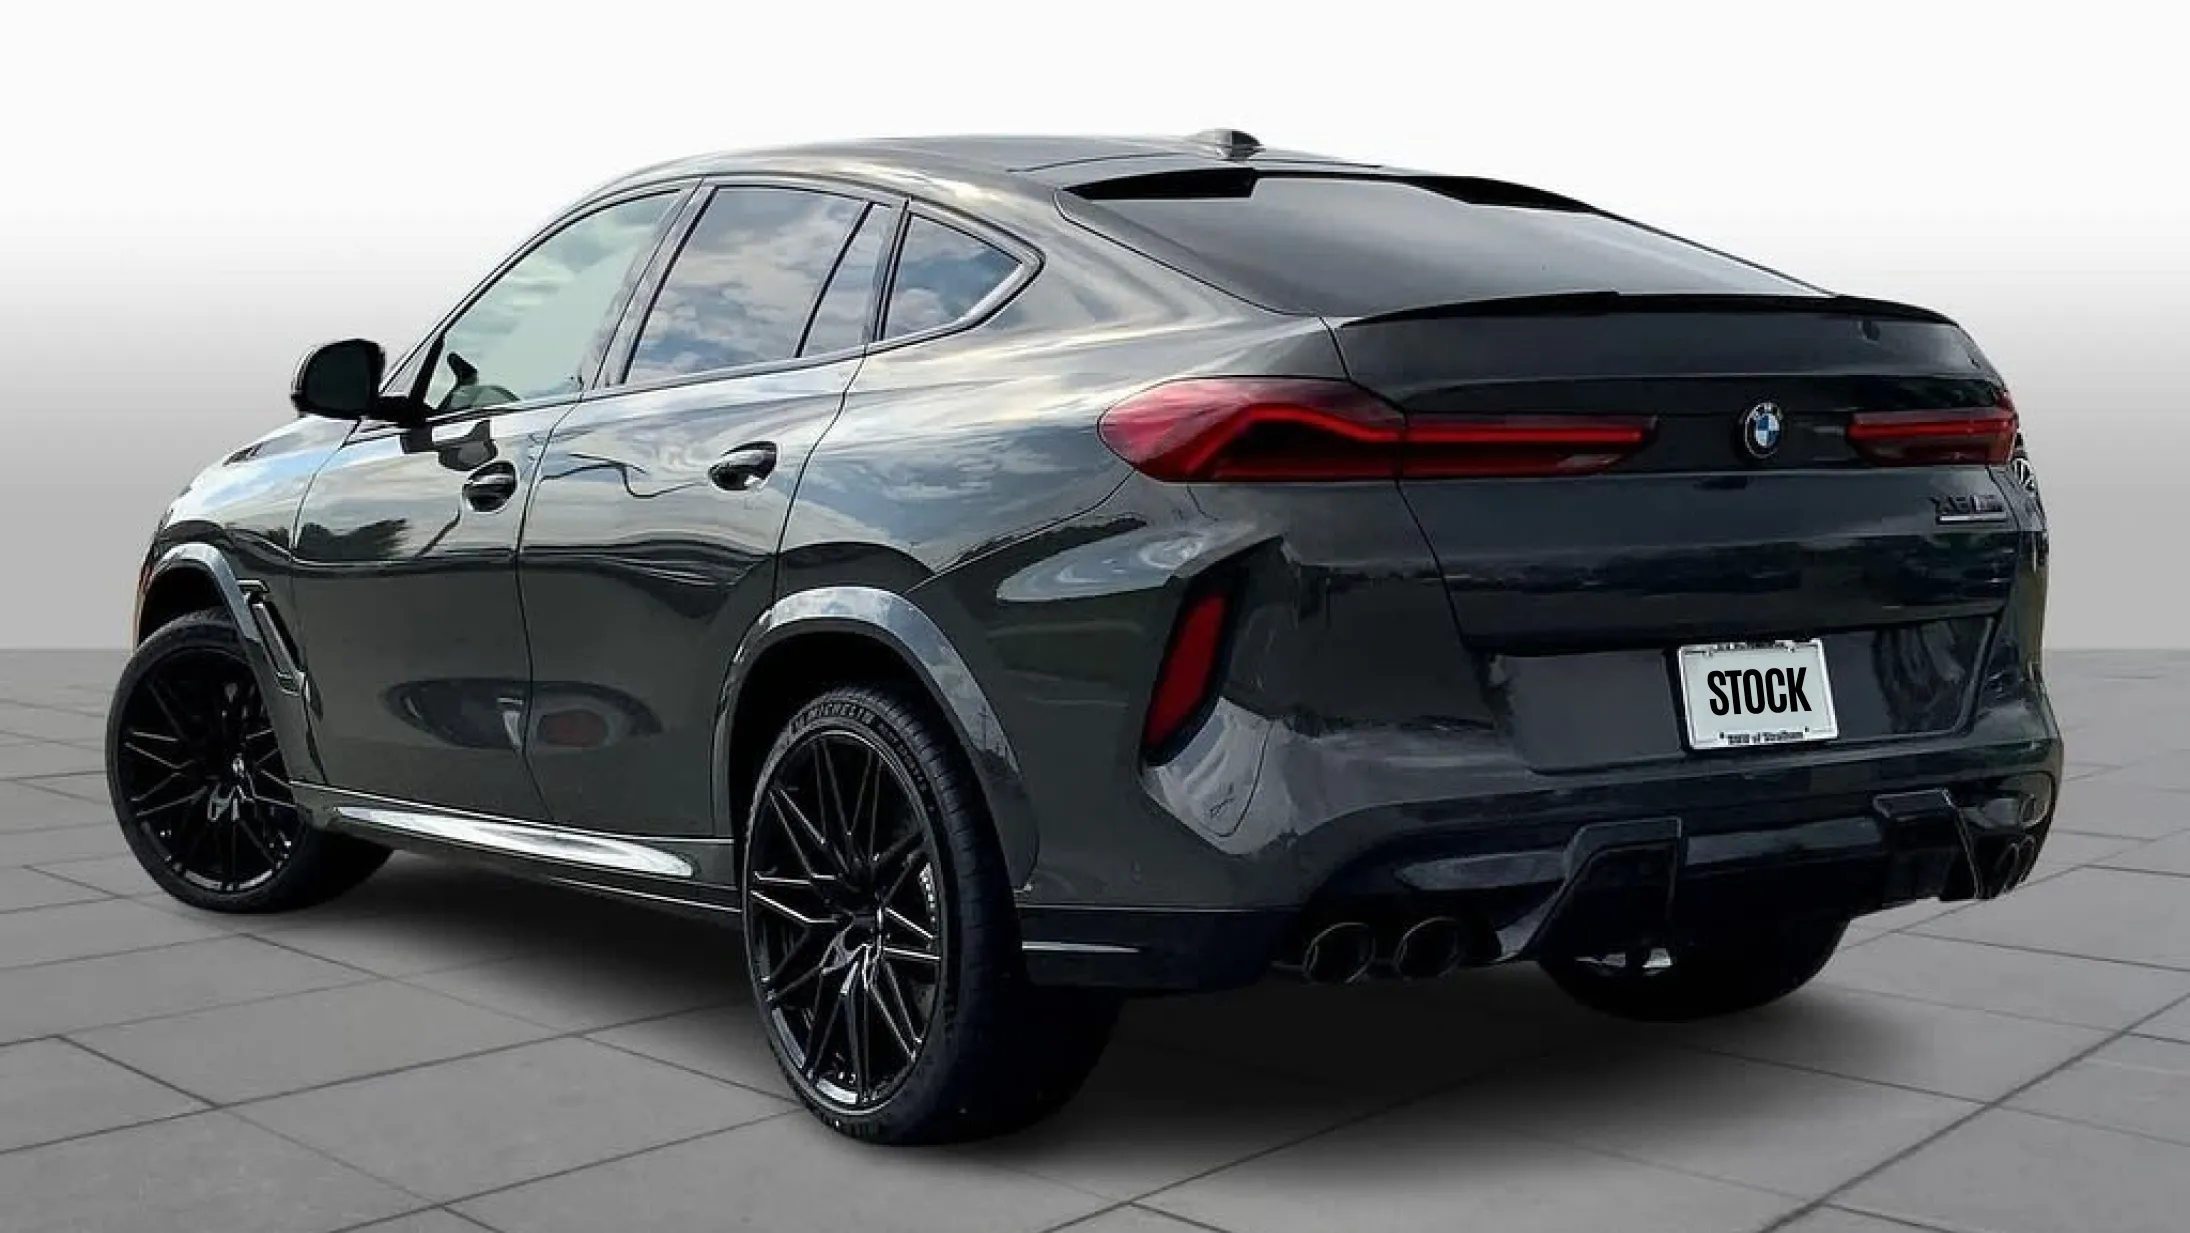 Rear angle view on a BMW X6M F96 LCI Restyling with a body kit giving the car a custom appearance